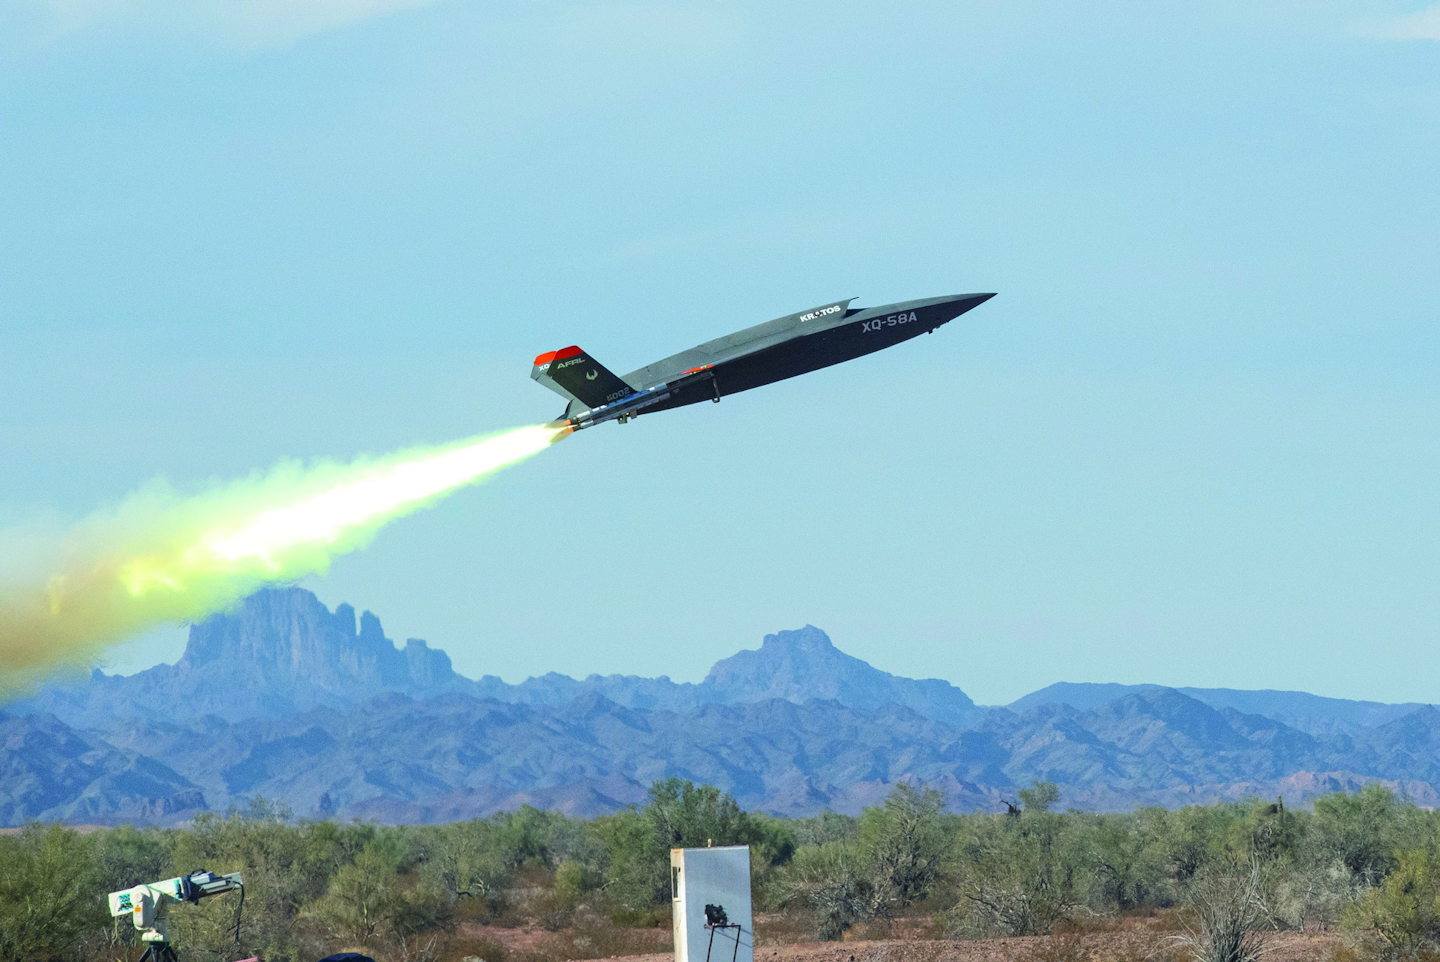 An XQ-58A Valkyrie low-cost unmanned aerial vehicle launches at the U.S. Army Yuma Proving Ground, Ariz., to demonstrate new communications ability to exchange information with other aircraft.